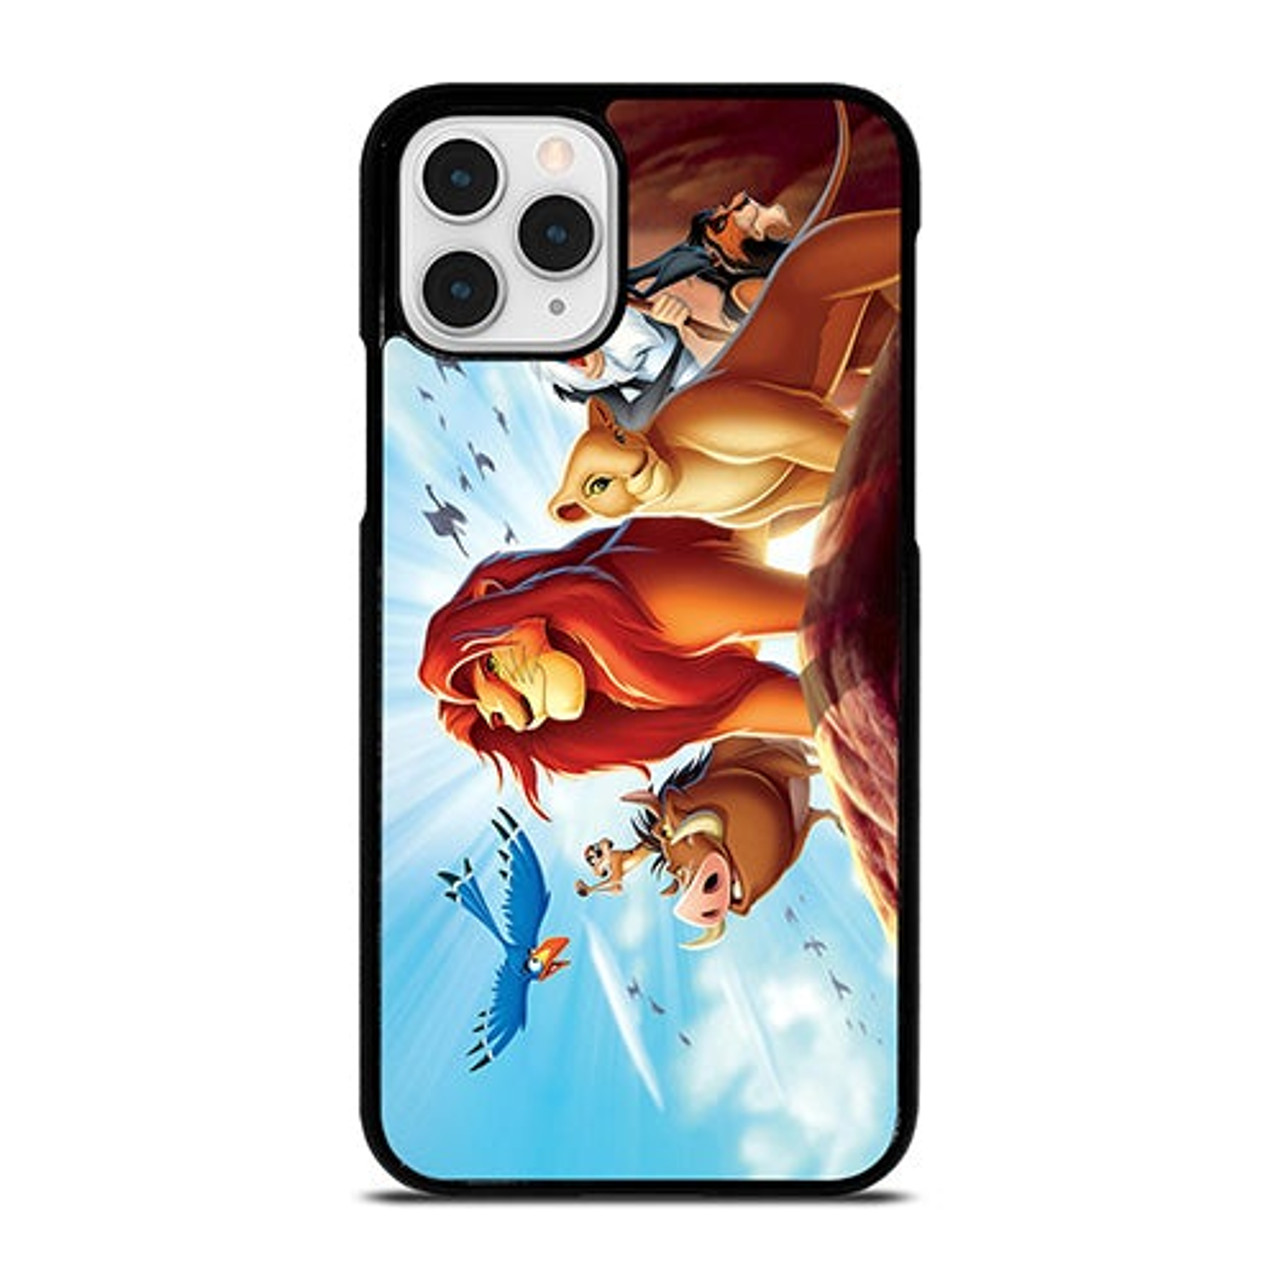 Simba The Lion King Disney Iphone 11 Pro Case Cover